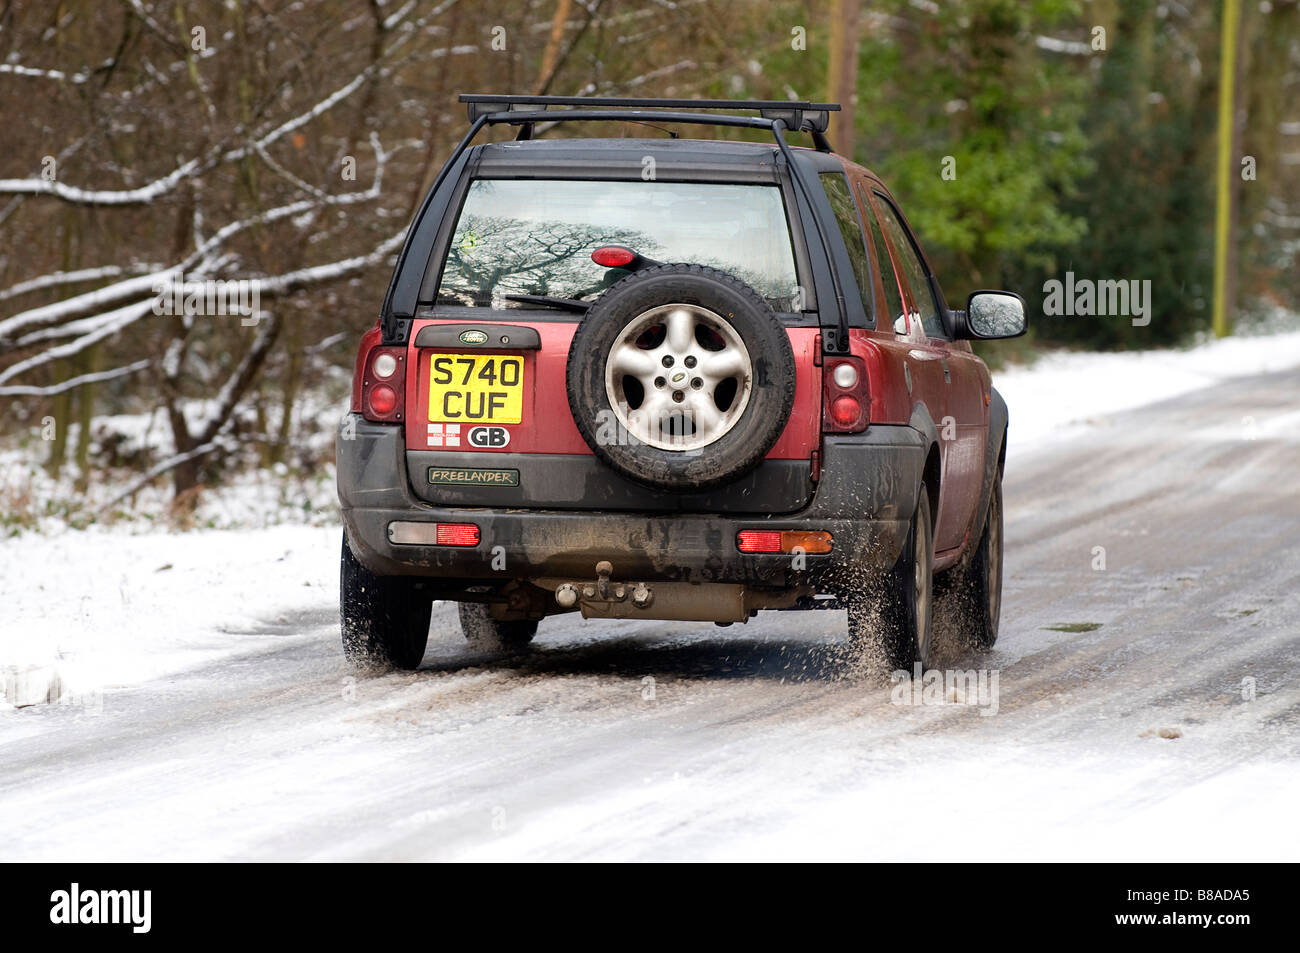 1998 Land Rover Freelander driving on icy snowyroad Stock Photo